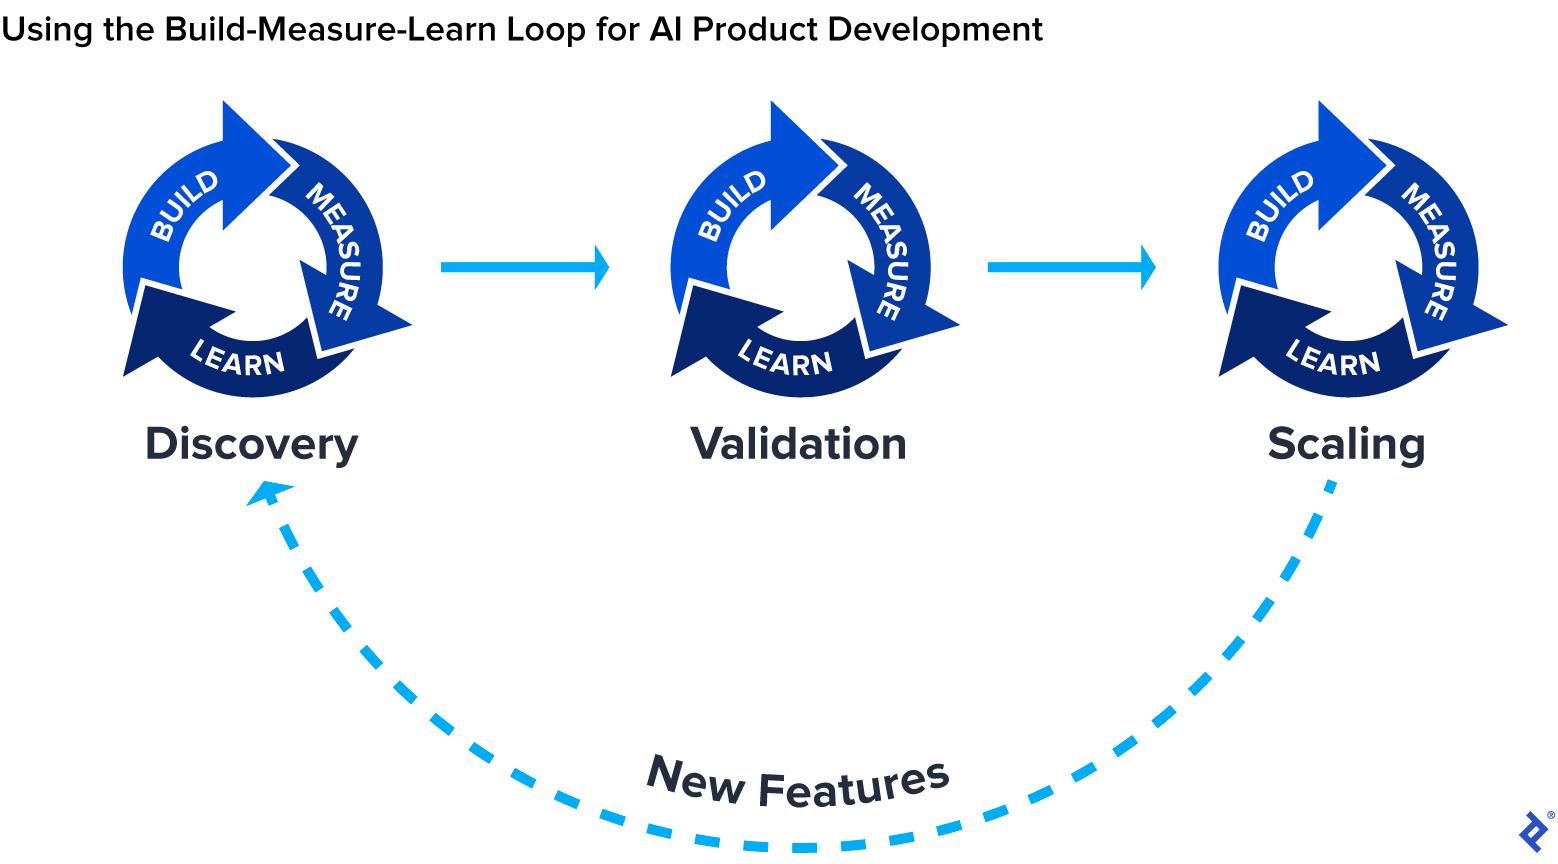 Using the Build-Measure-Learn Loop for AI Product Development includes “Discovery,” “Validation,” and “Scaling,” each with its own feedback loop.